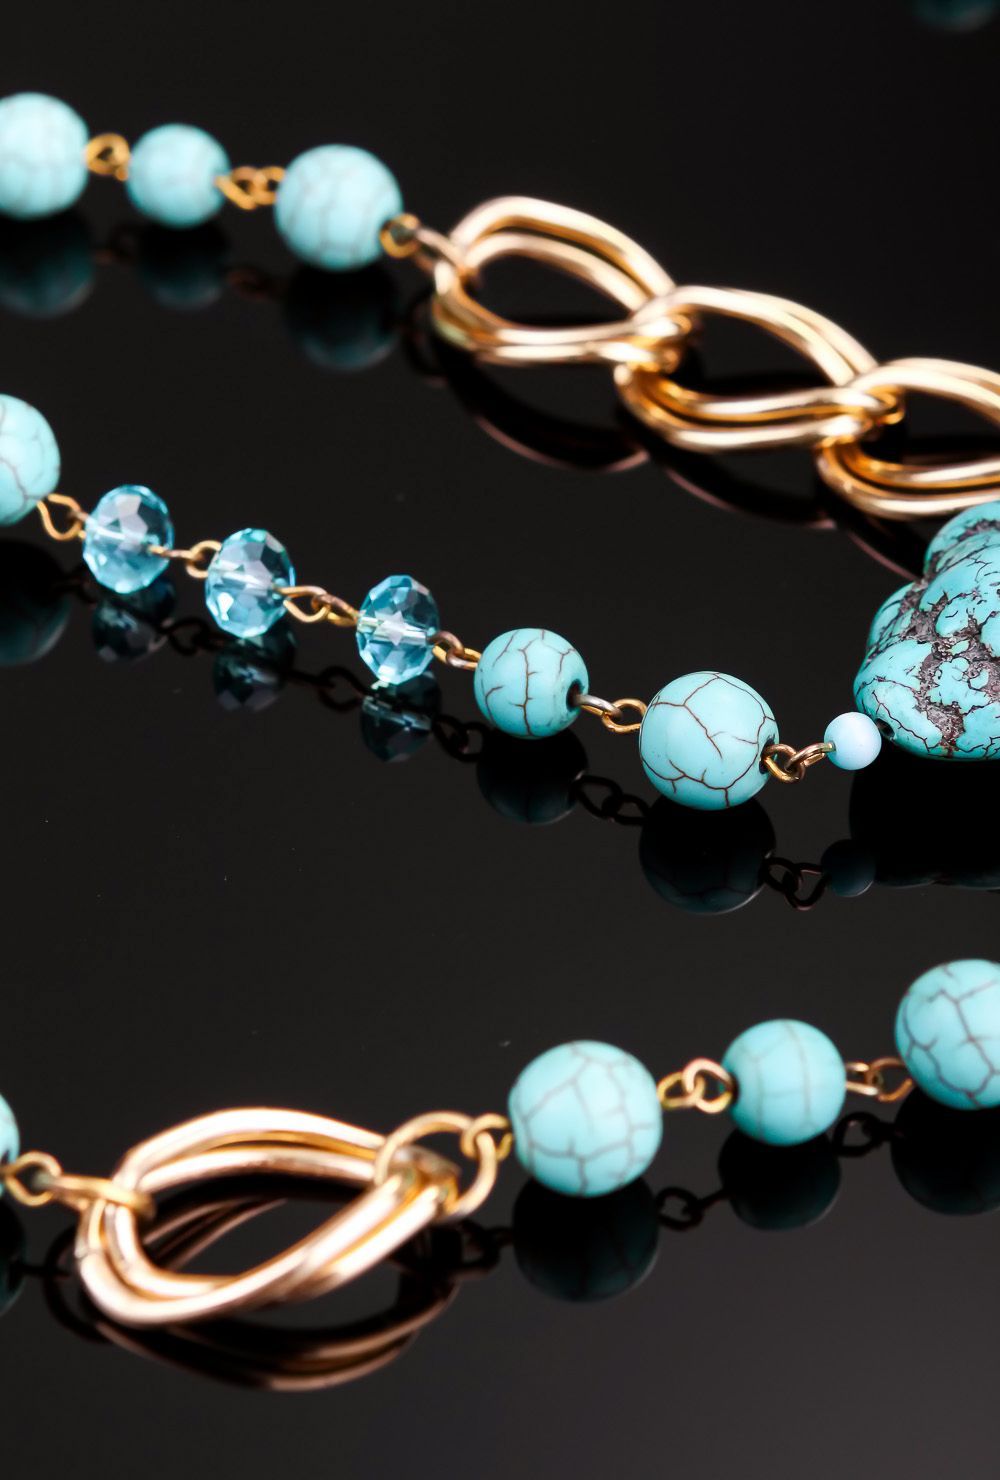 Beads made of turquoise photo 4